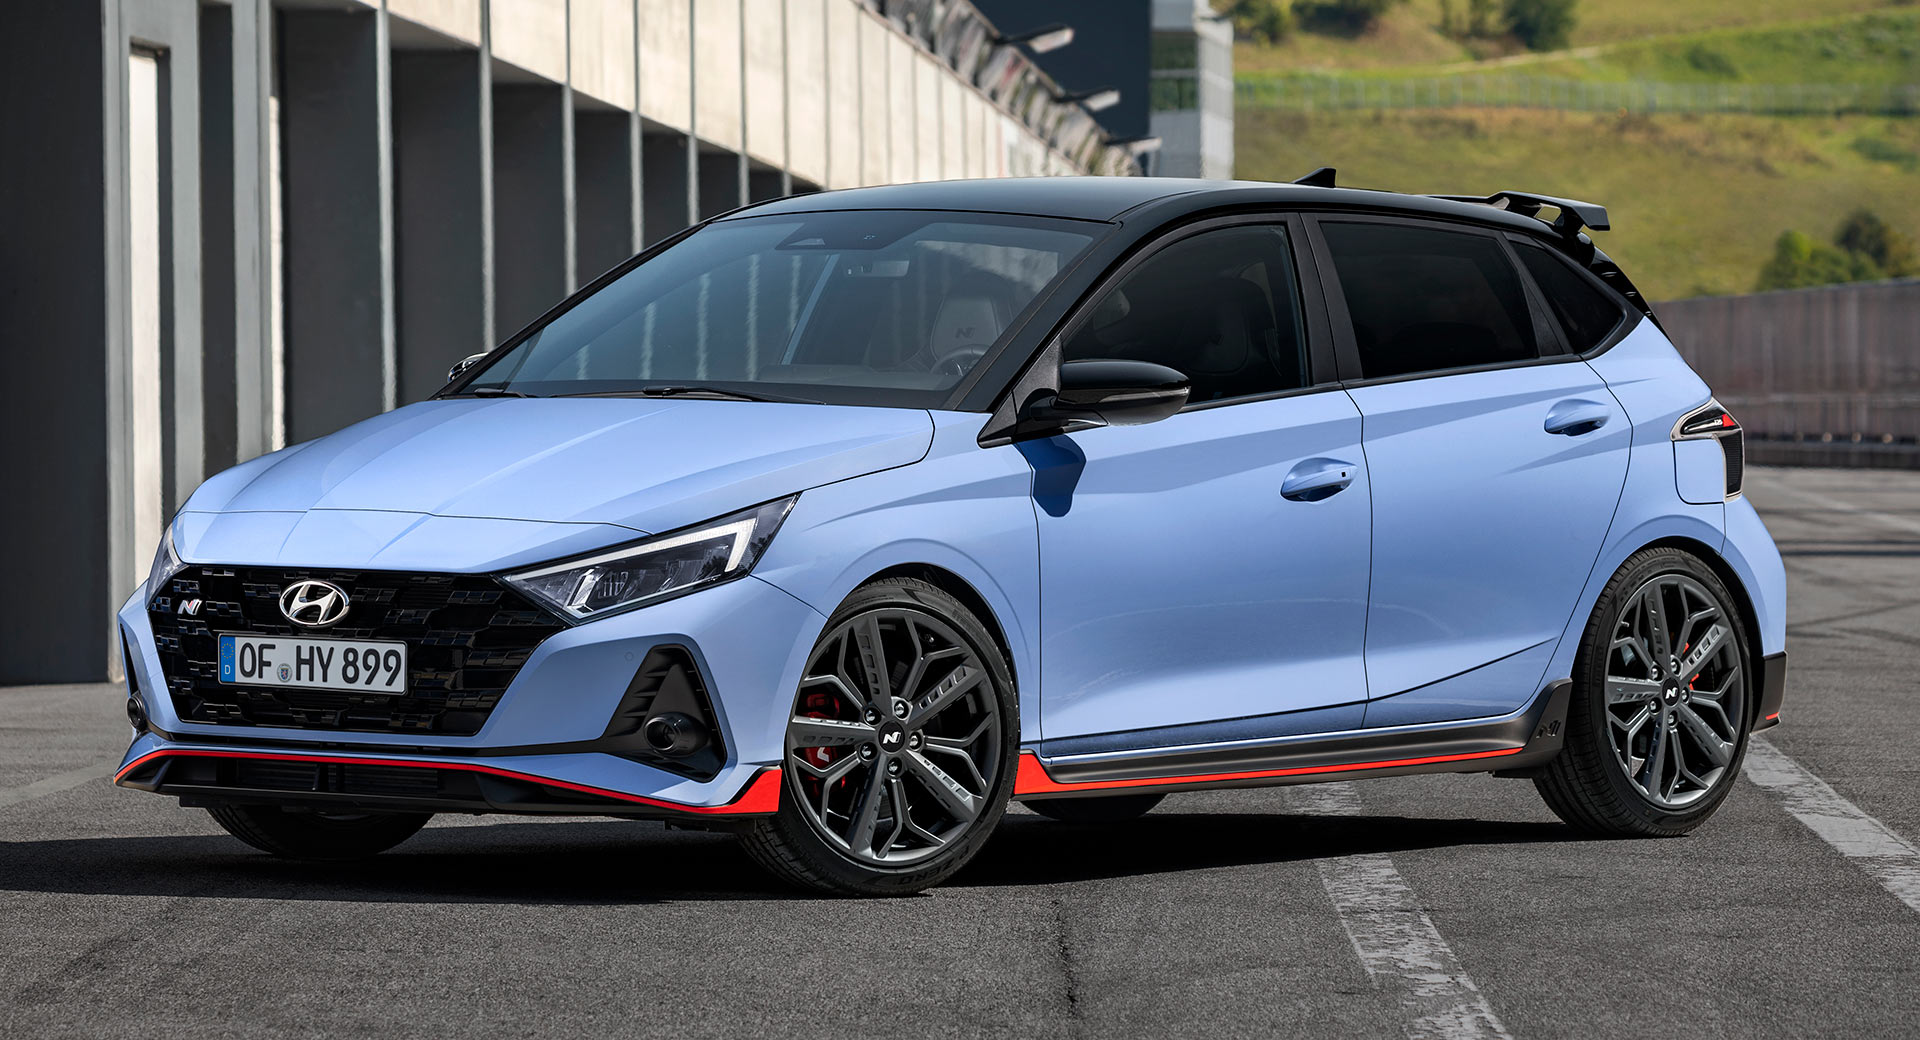 2021 Hyundai i20 N Is Here To Shake Up The Hot Hatch Market